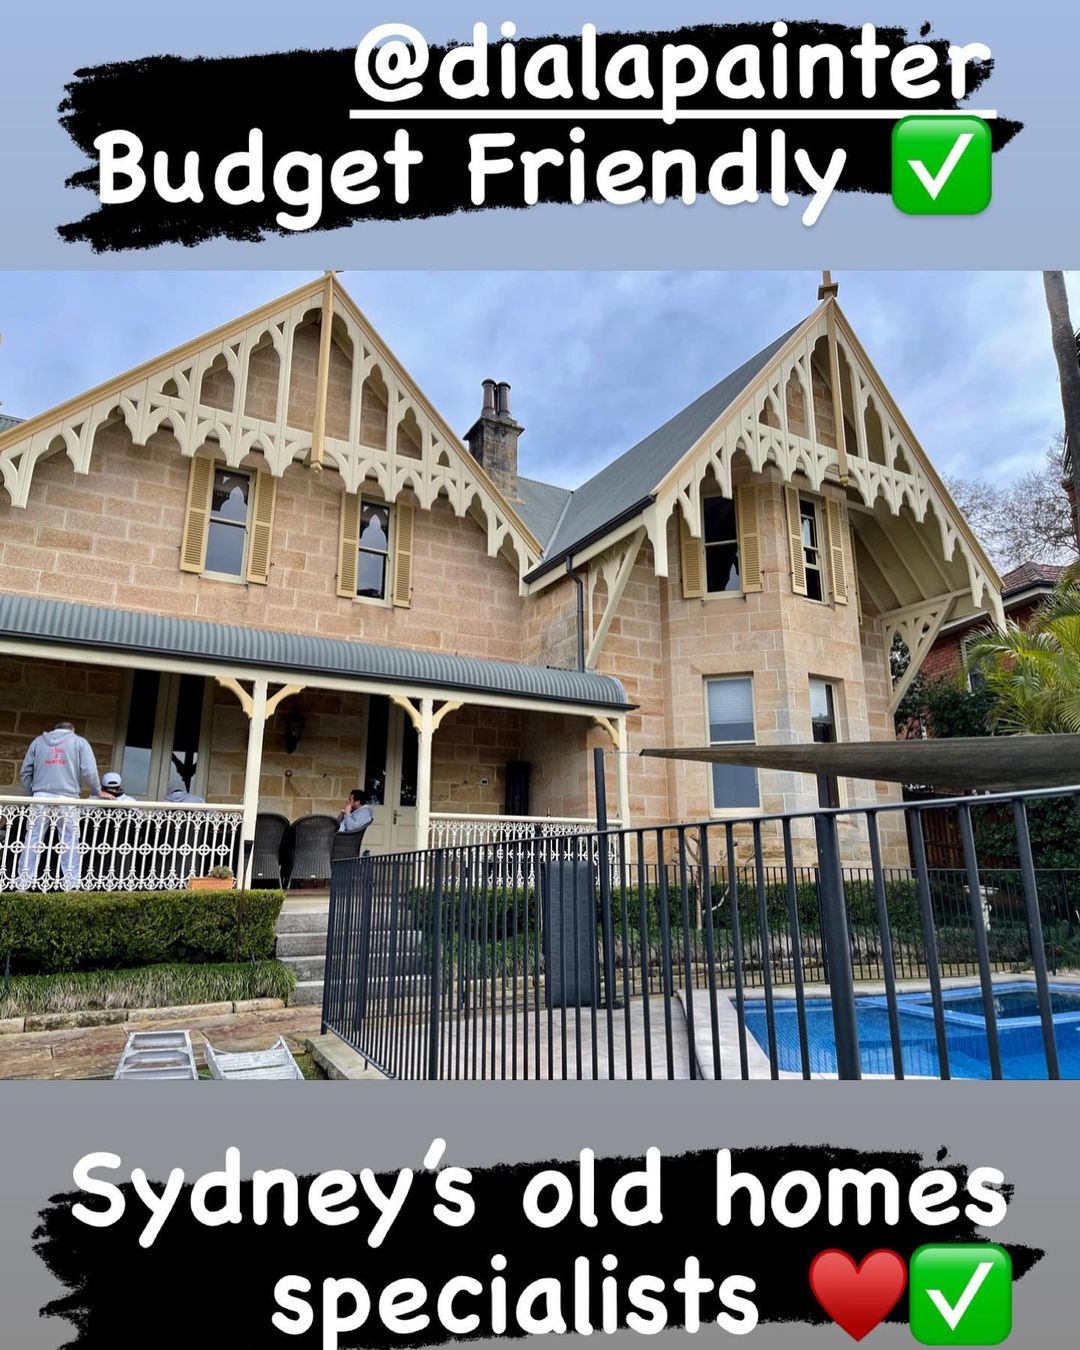 Sydneys old homes specialists Professi